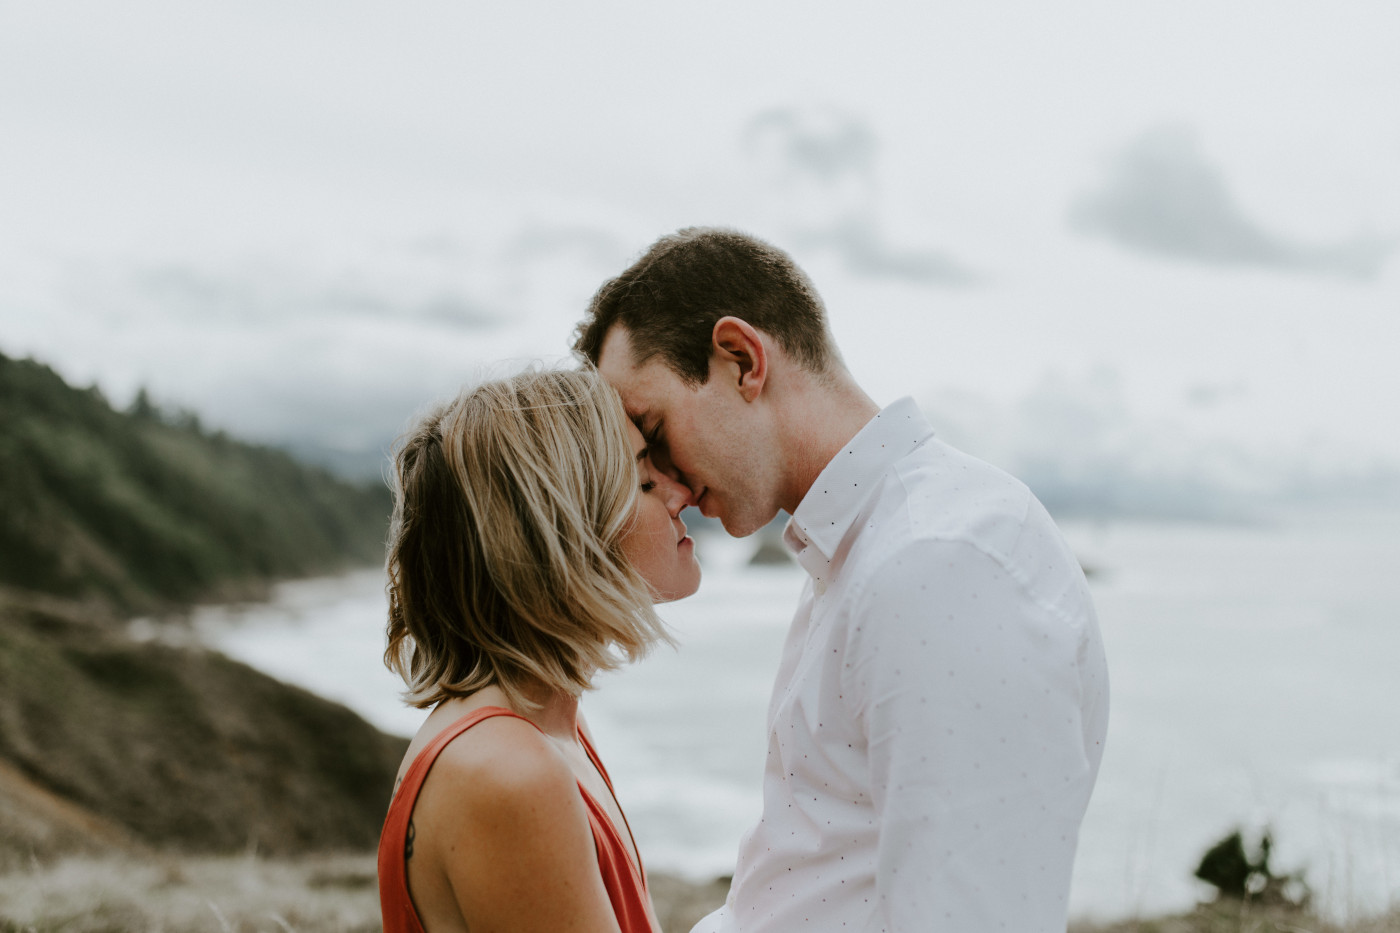 Billy and Chelsey put their foreheads together in front of Cannon Beach. Elopement wedding photography at Cannon Beach by Sienna Plus Josh.